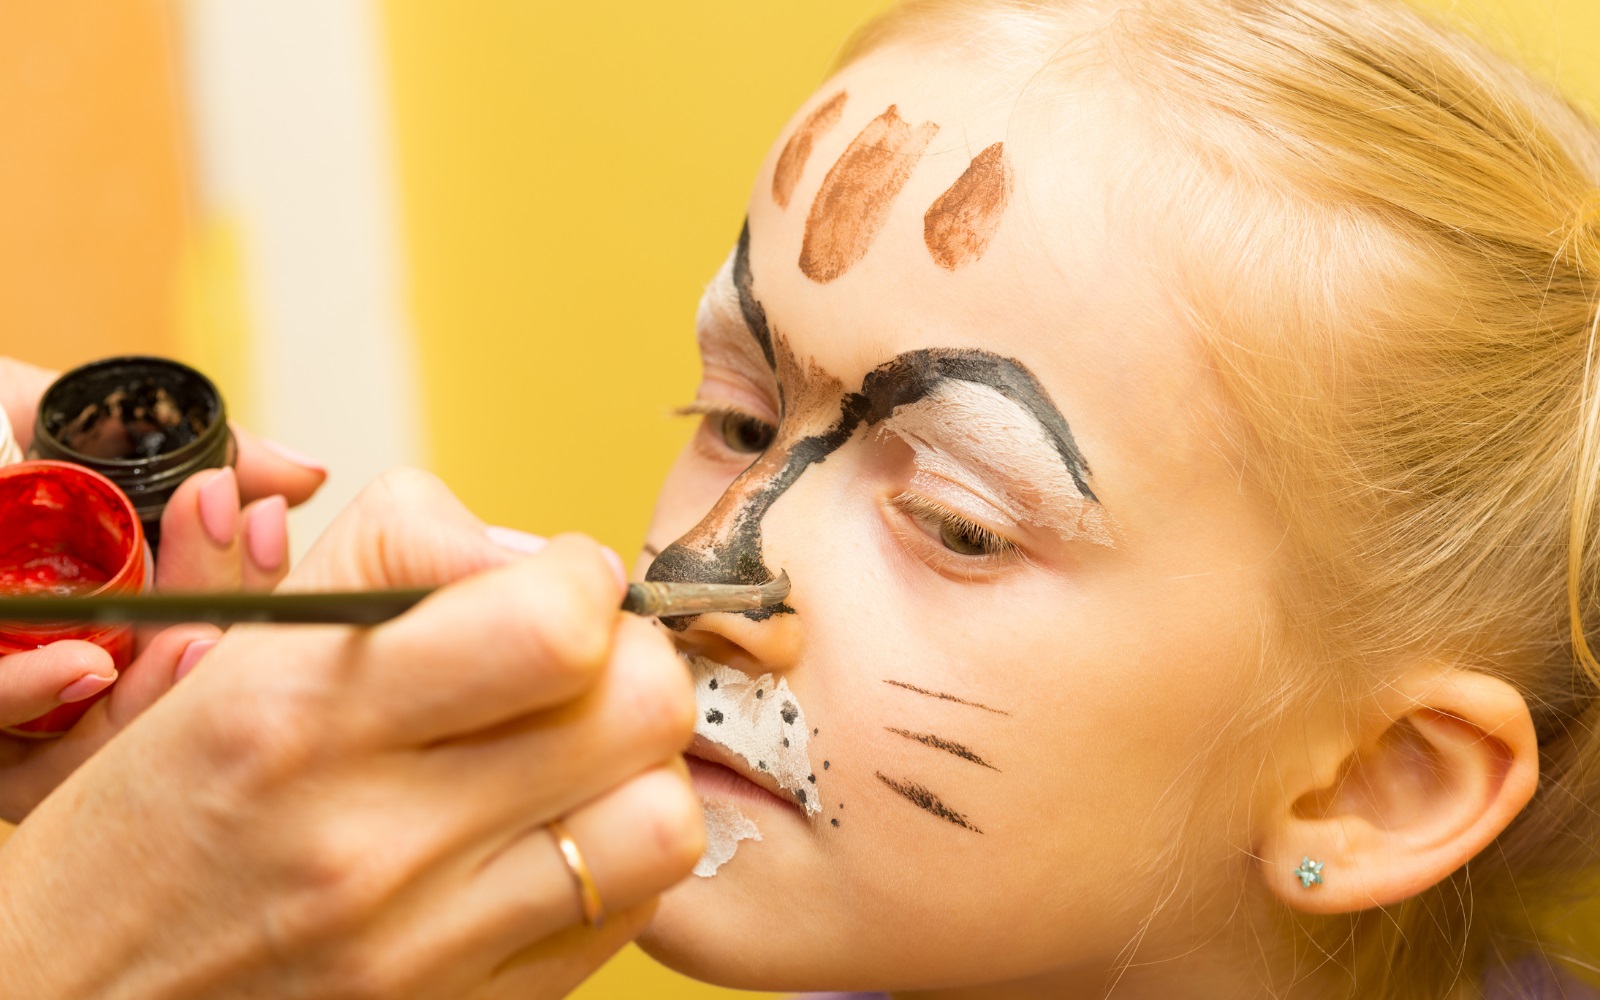 Makeup Business For Childrens Face Painting.